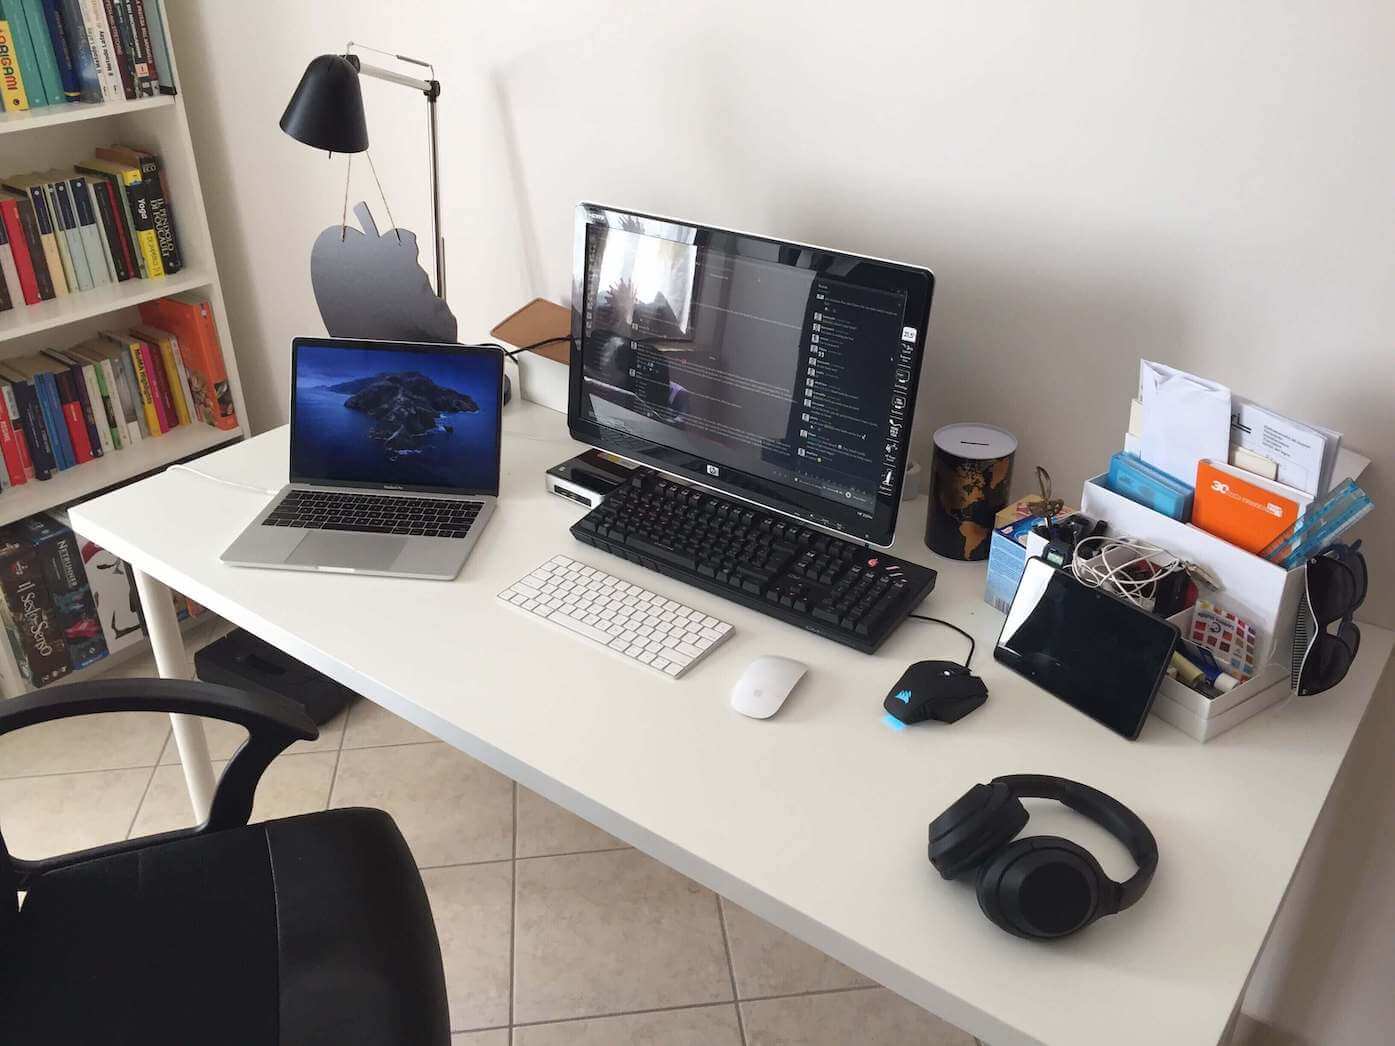 Alessio's home office setup